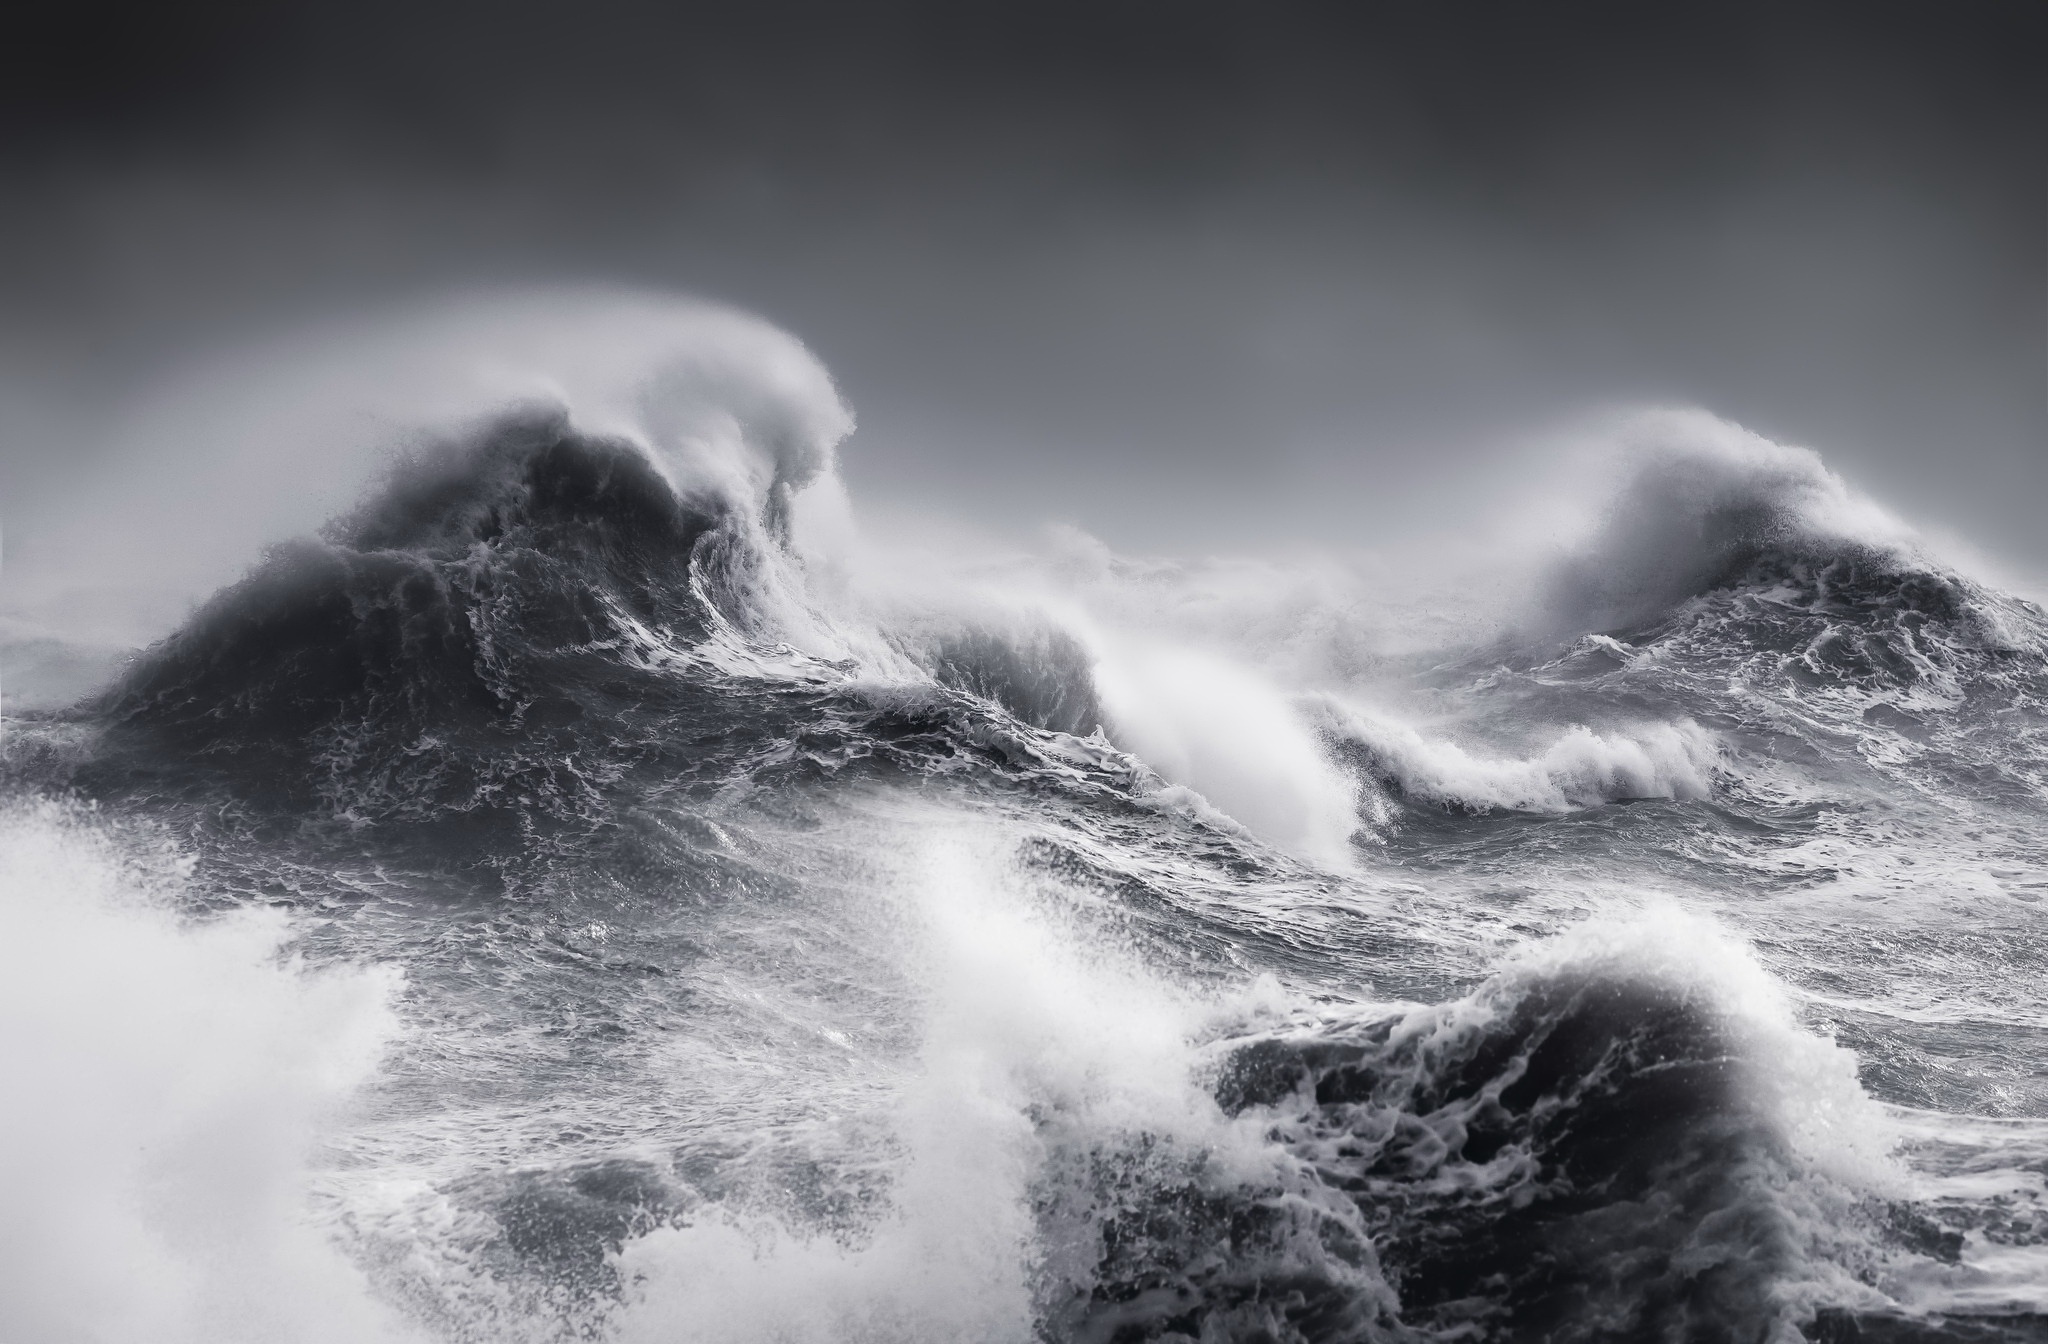 General 2048x1344 storm sea nature waves water gray monochrome splashes